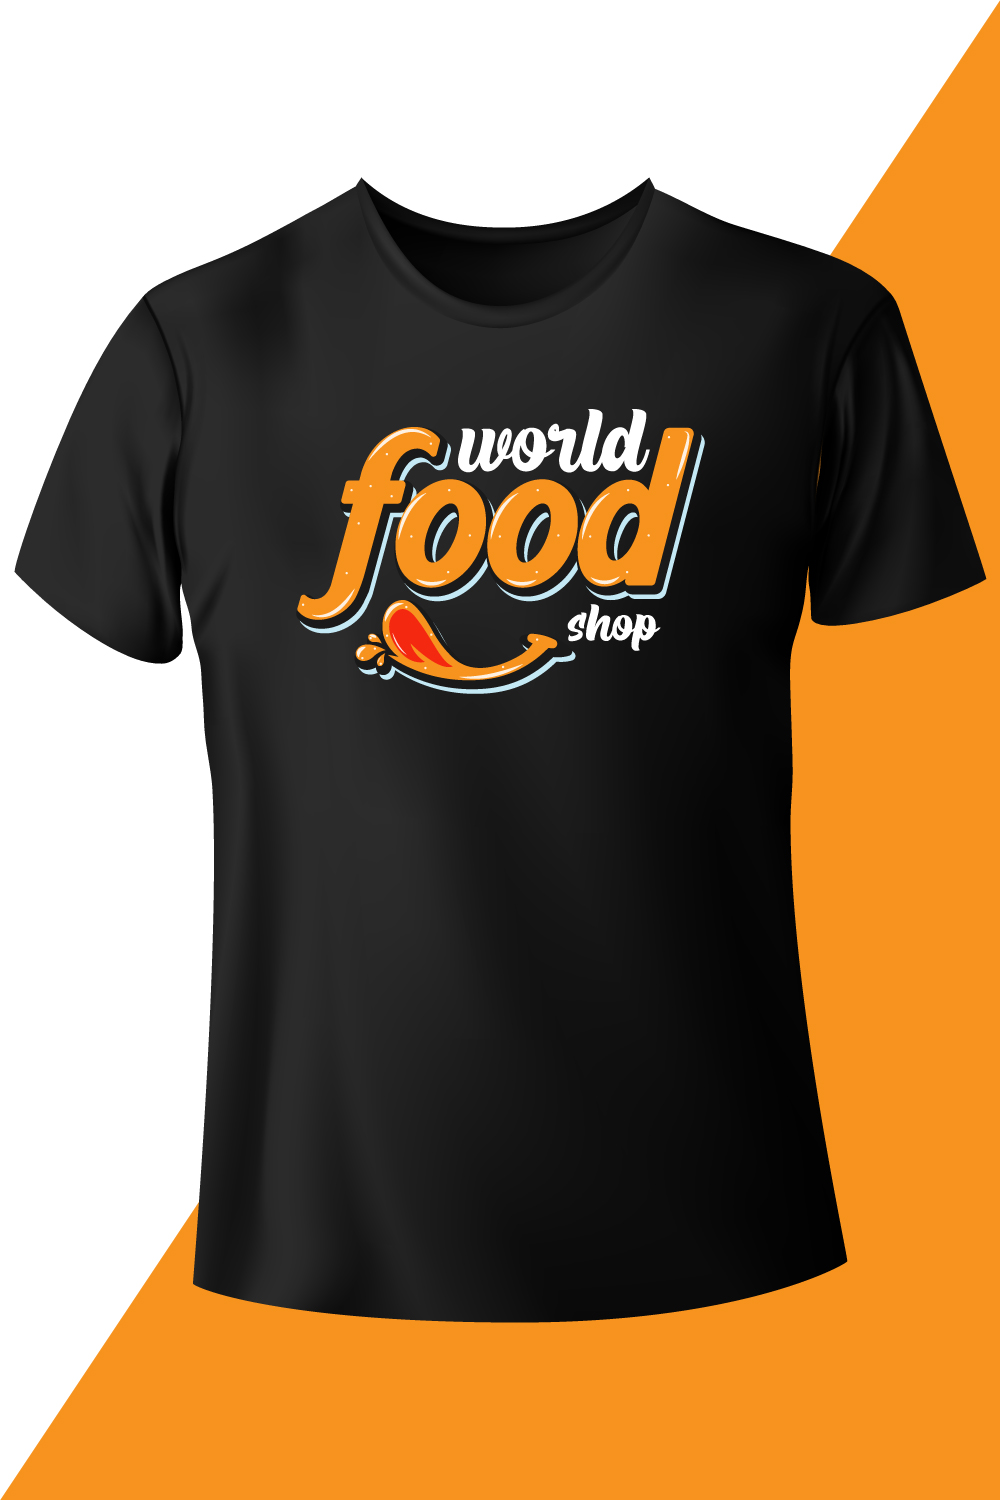 Image of a black t-shirt with an irresistible inscription world food shop.